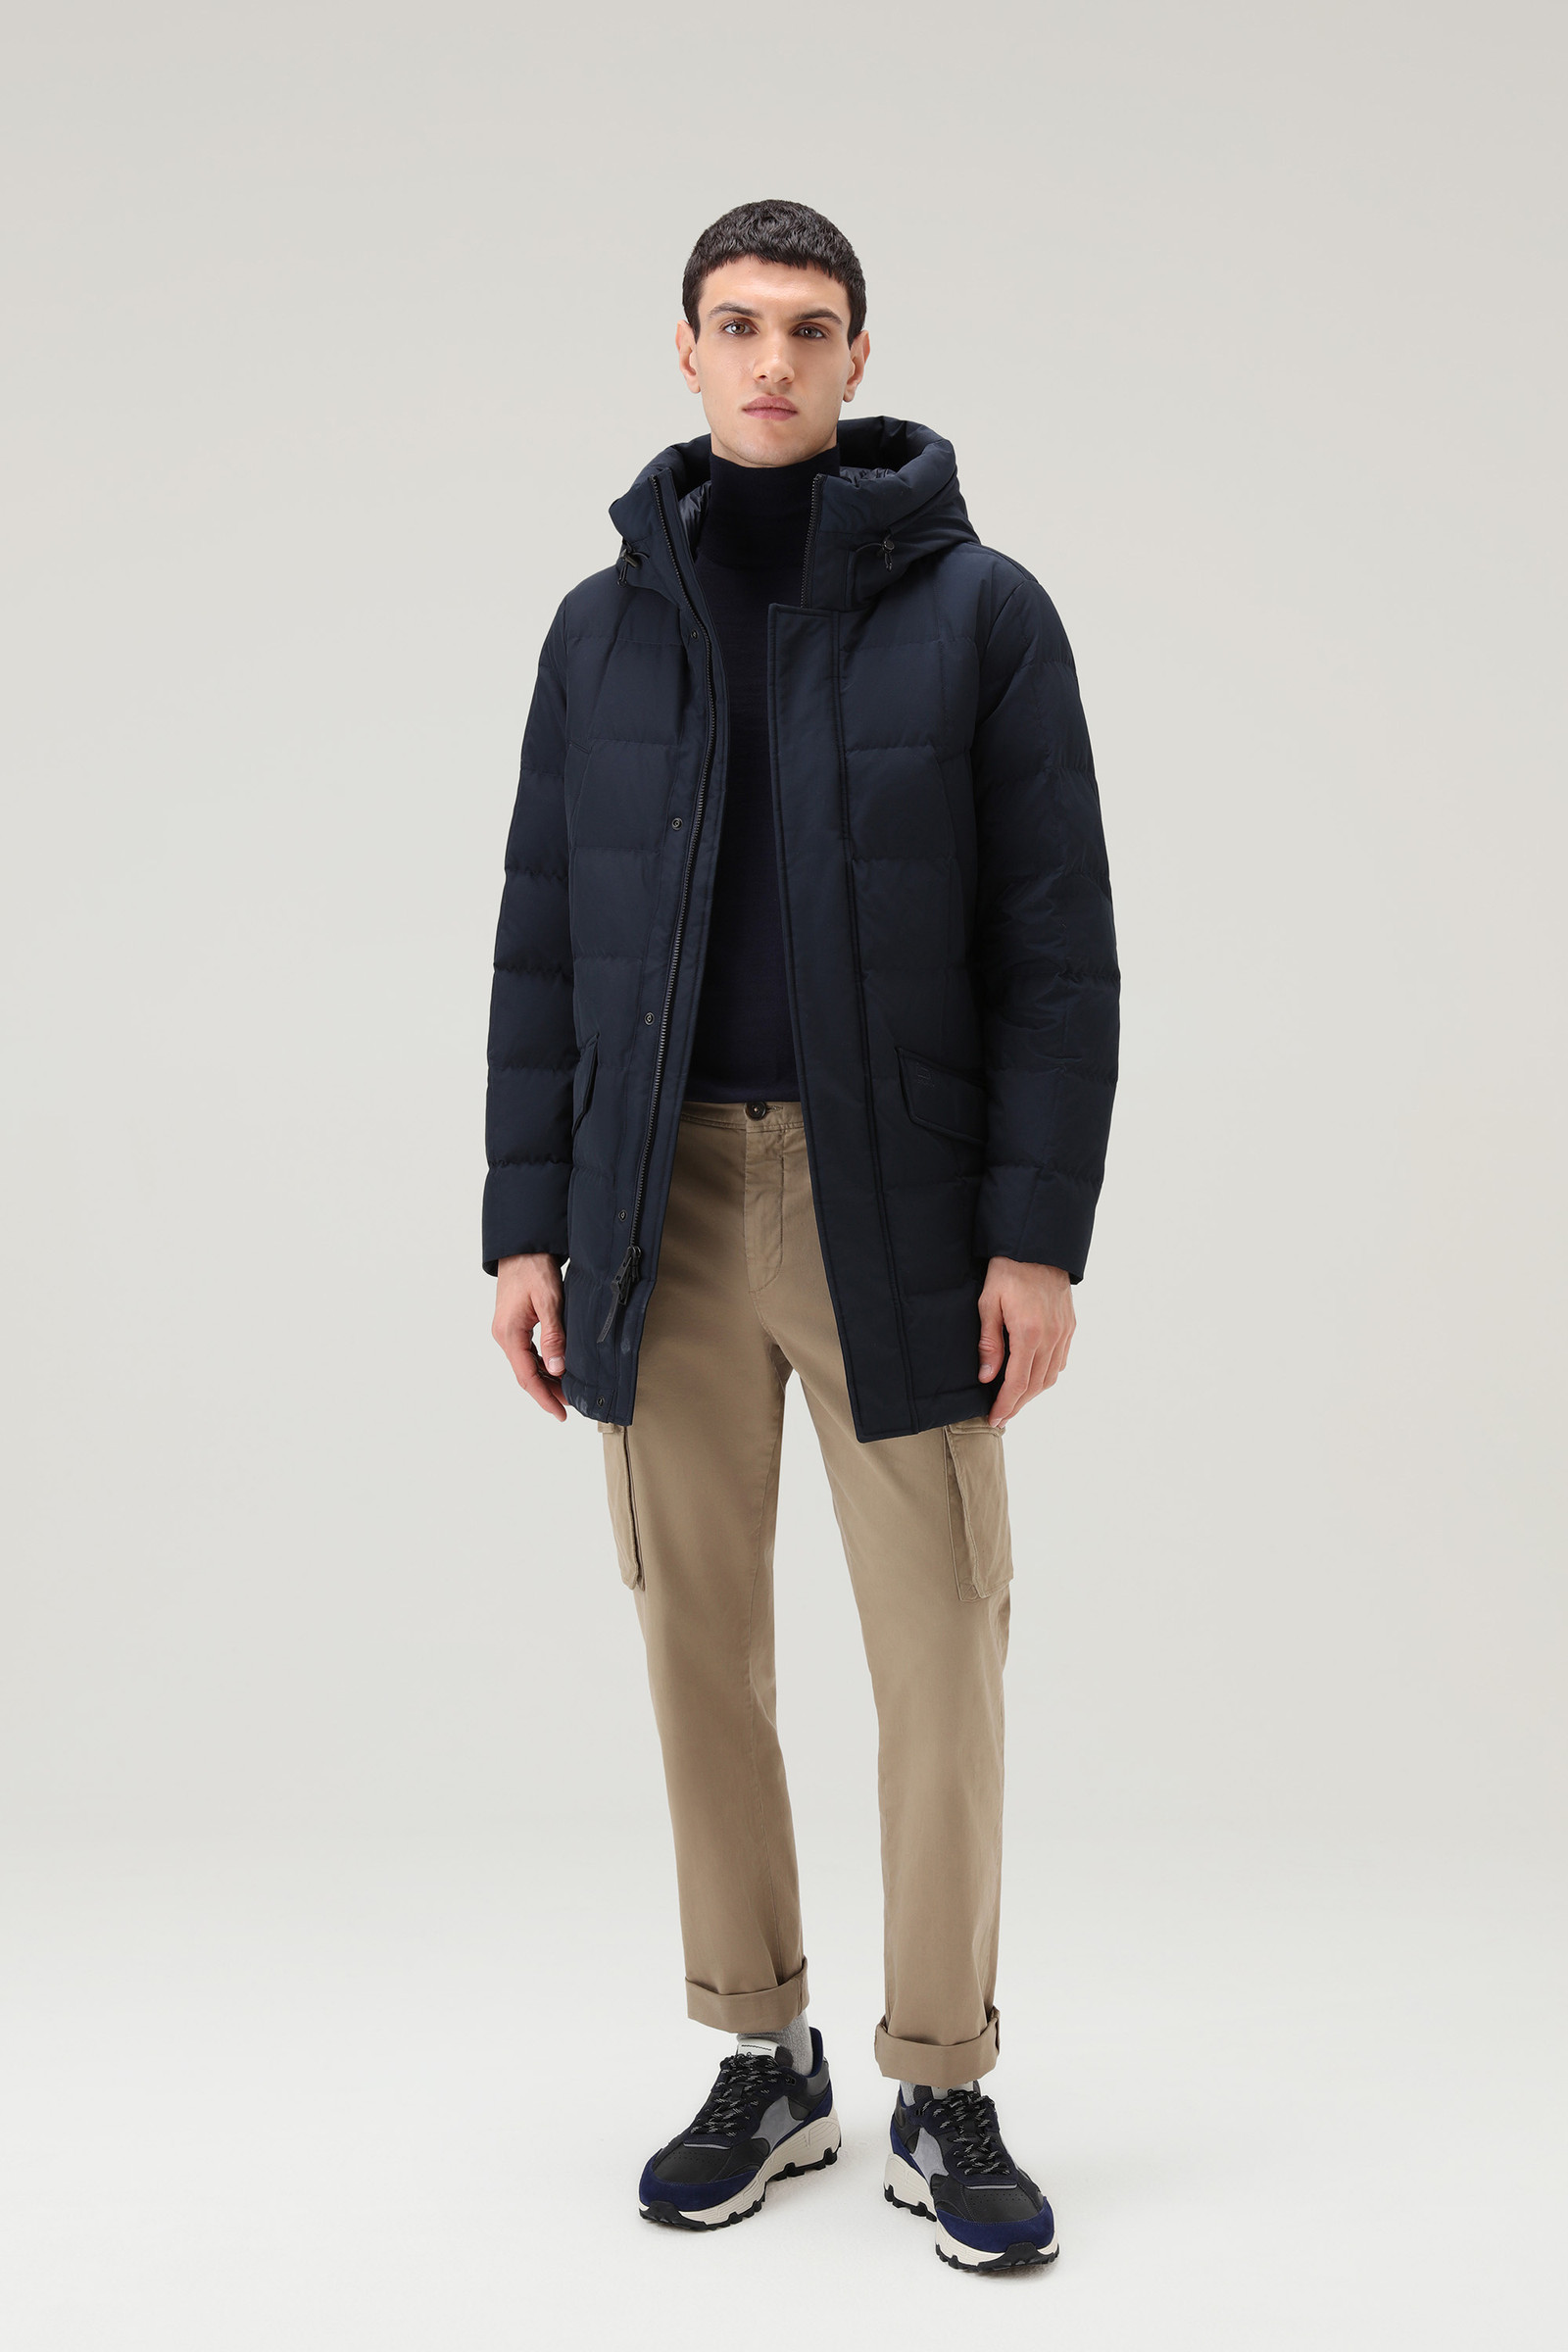 Blizzard Parka in Ramar Cloth with Square Quilting Blue | Woolrich UK